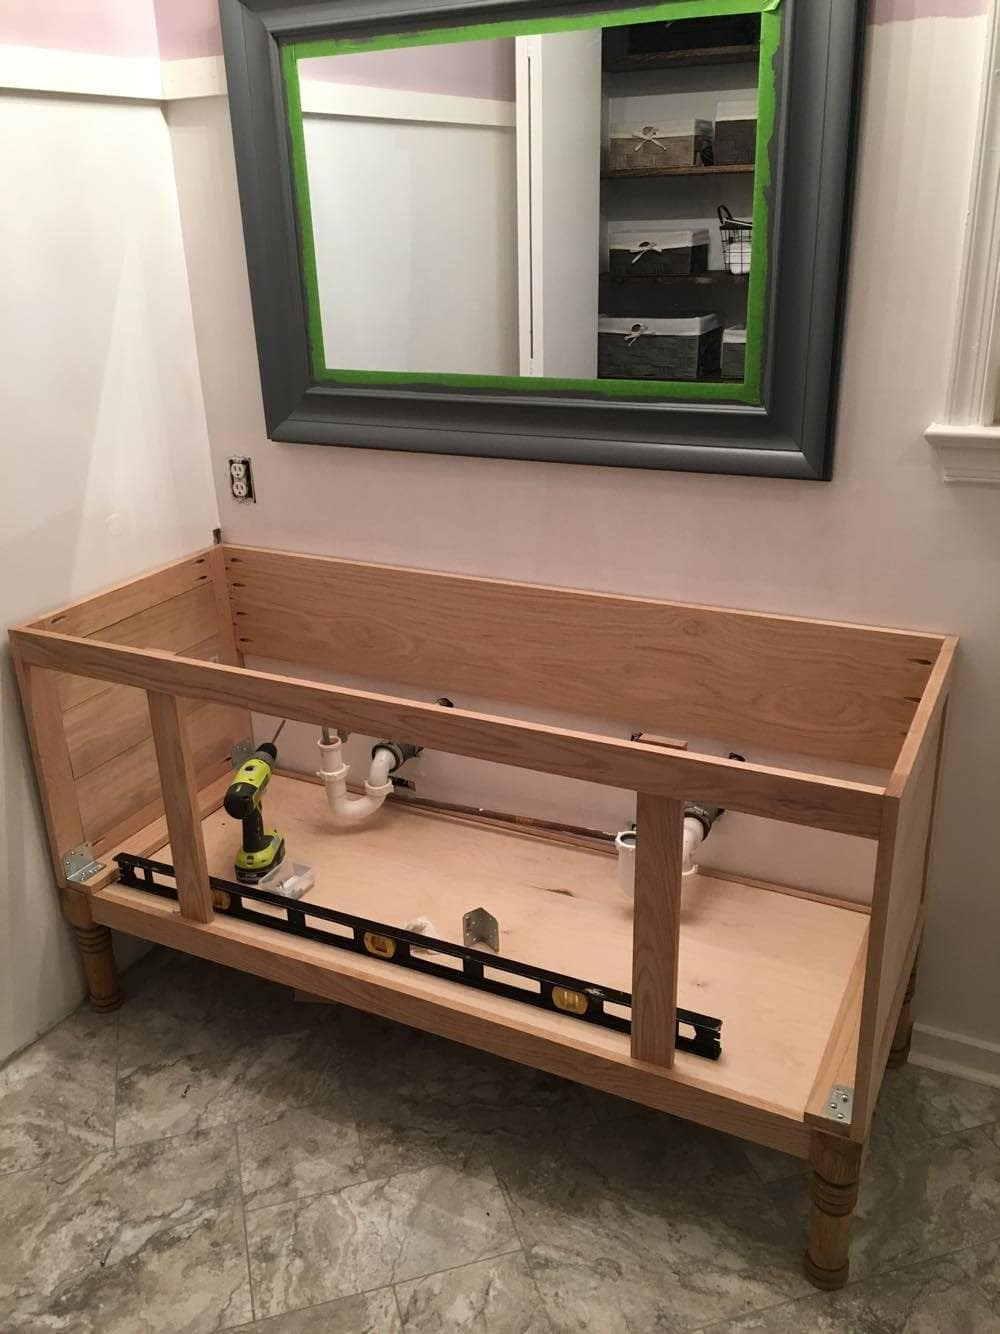 Bathroom Vanity DIY Plans
 The Bathroom Makeover That Would Never End